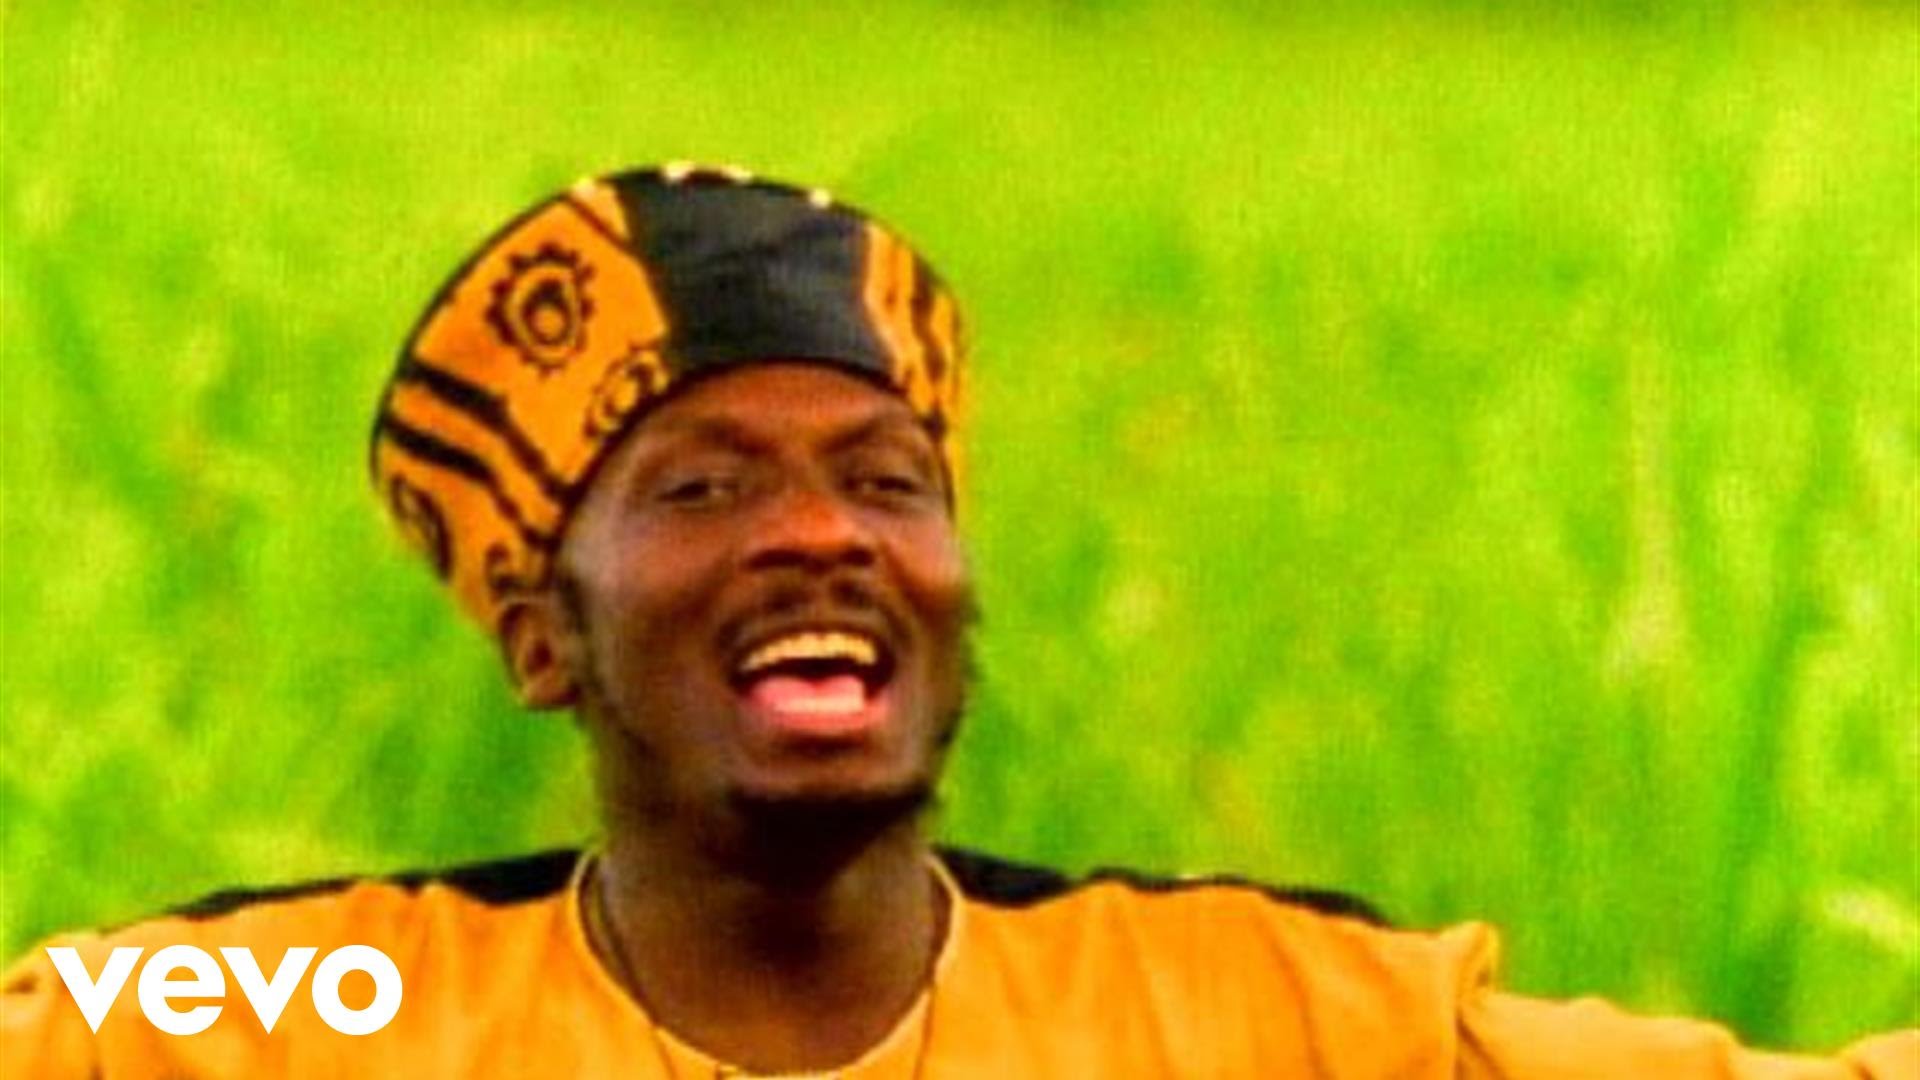 Jimmy Cliff - I Can See Clearly Now [1993]